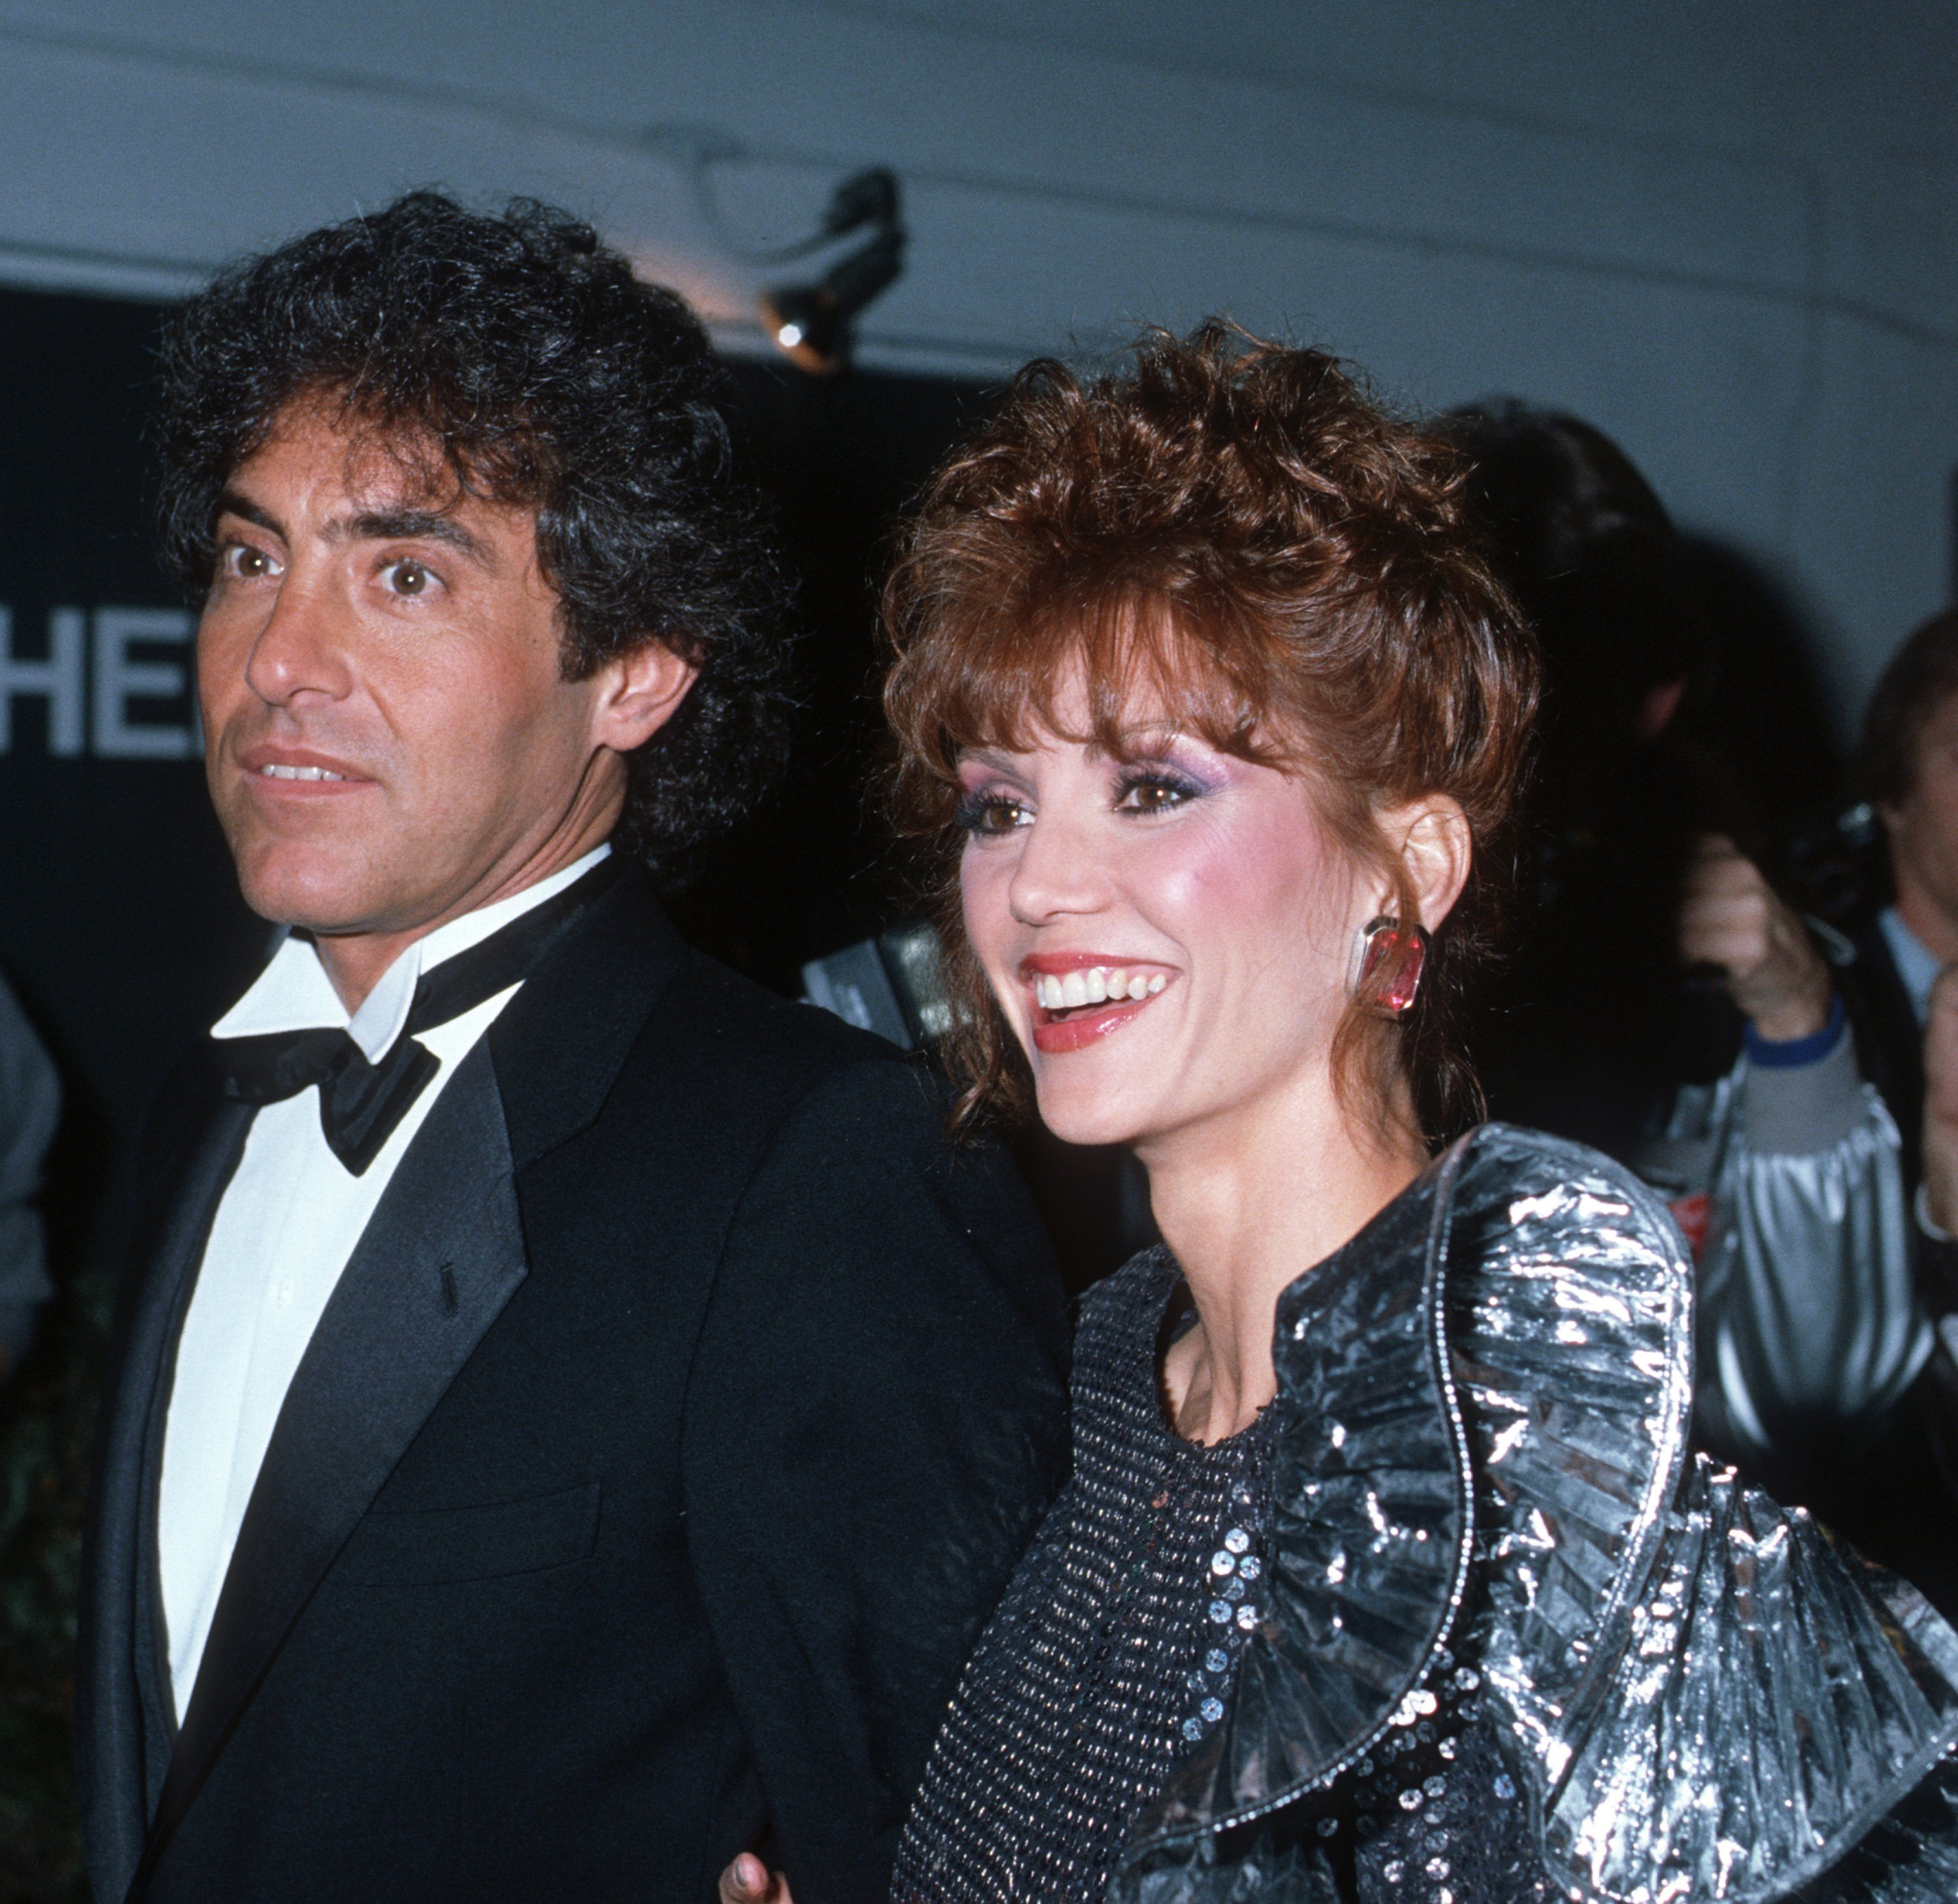 Harry Glassman and Victoria Principal during 10th Annual People's Choice Awards at Santa Monica Civic Auditorium in Santa Monica, California, United States. | Source: Getty Images